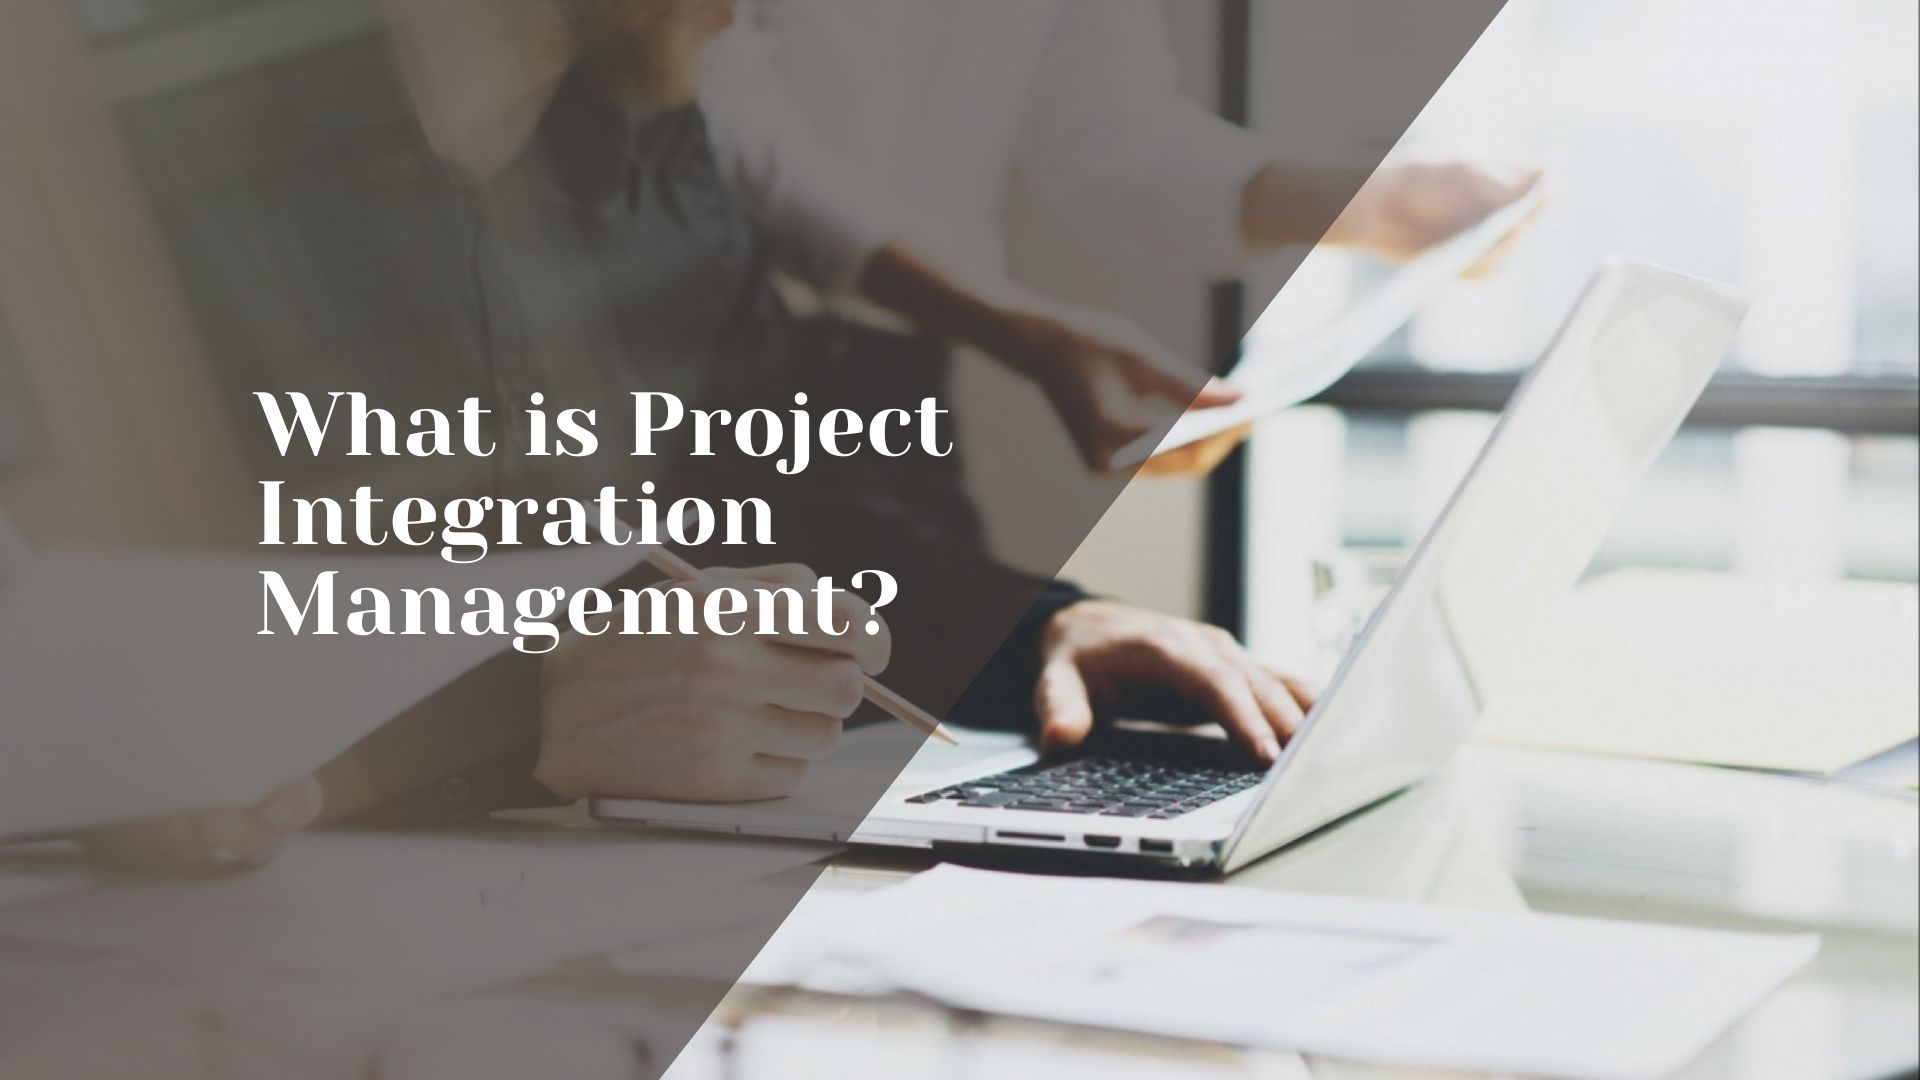 What is Project Integration Management